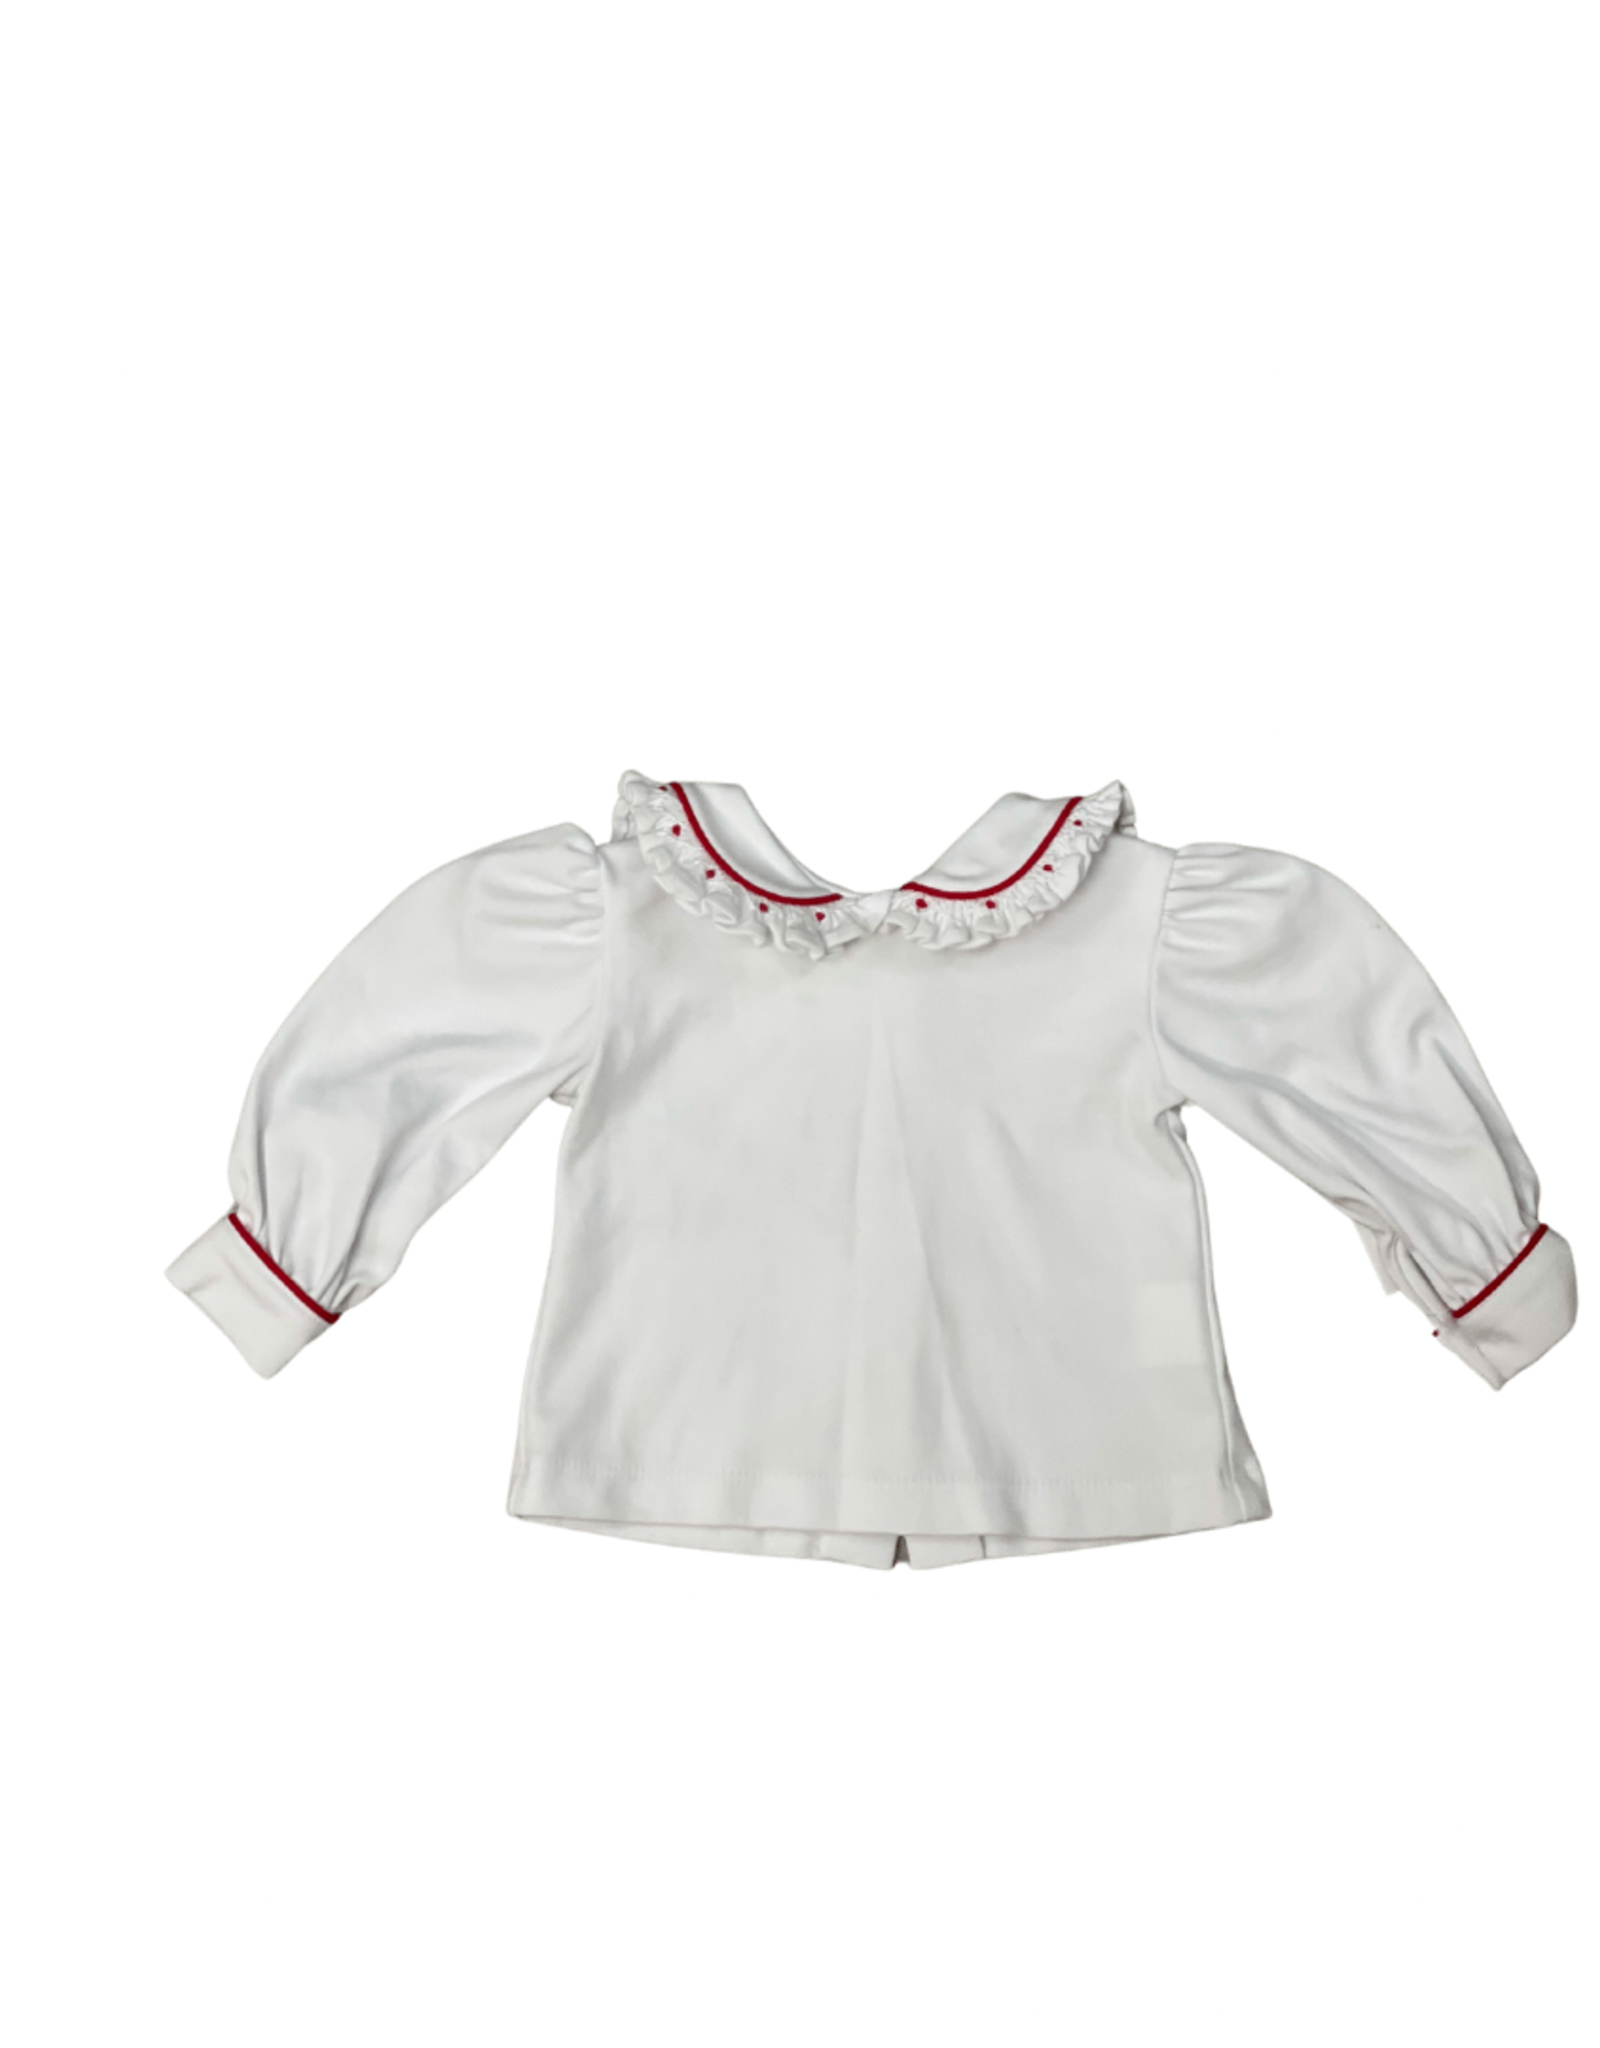 Zuccini White Knit Blouse w/ Red Smocked Detail